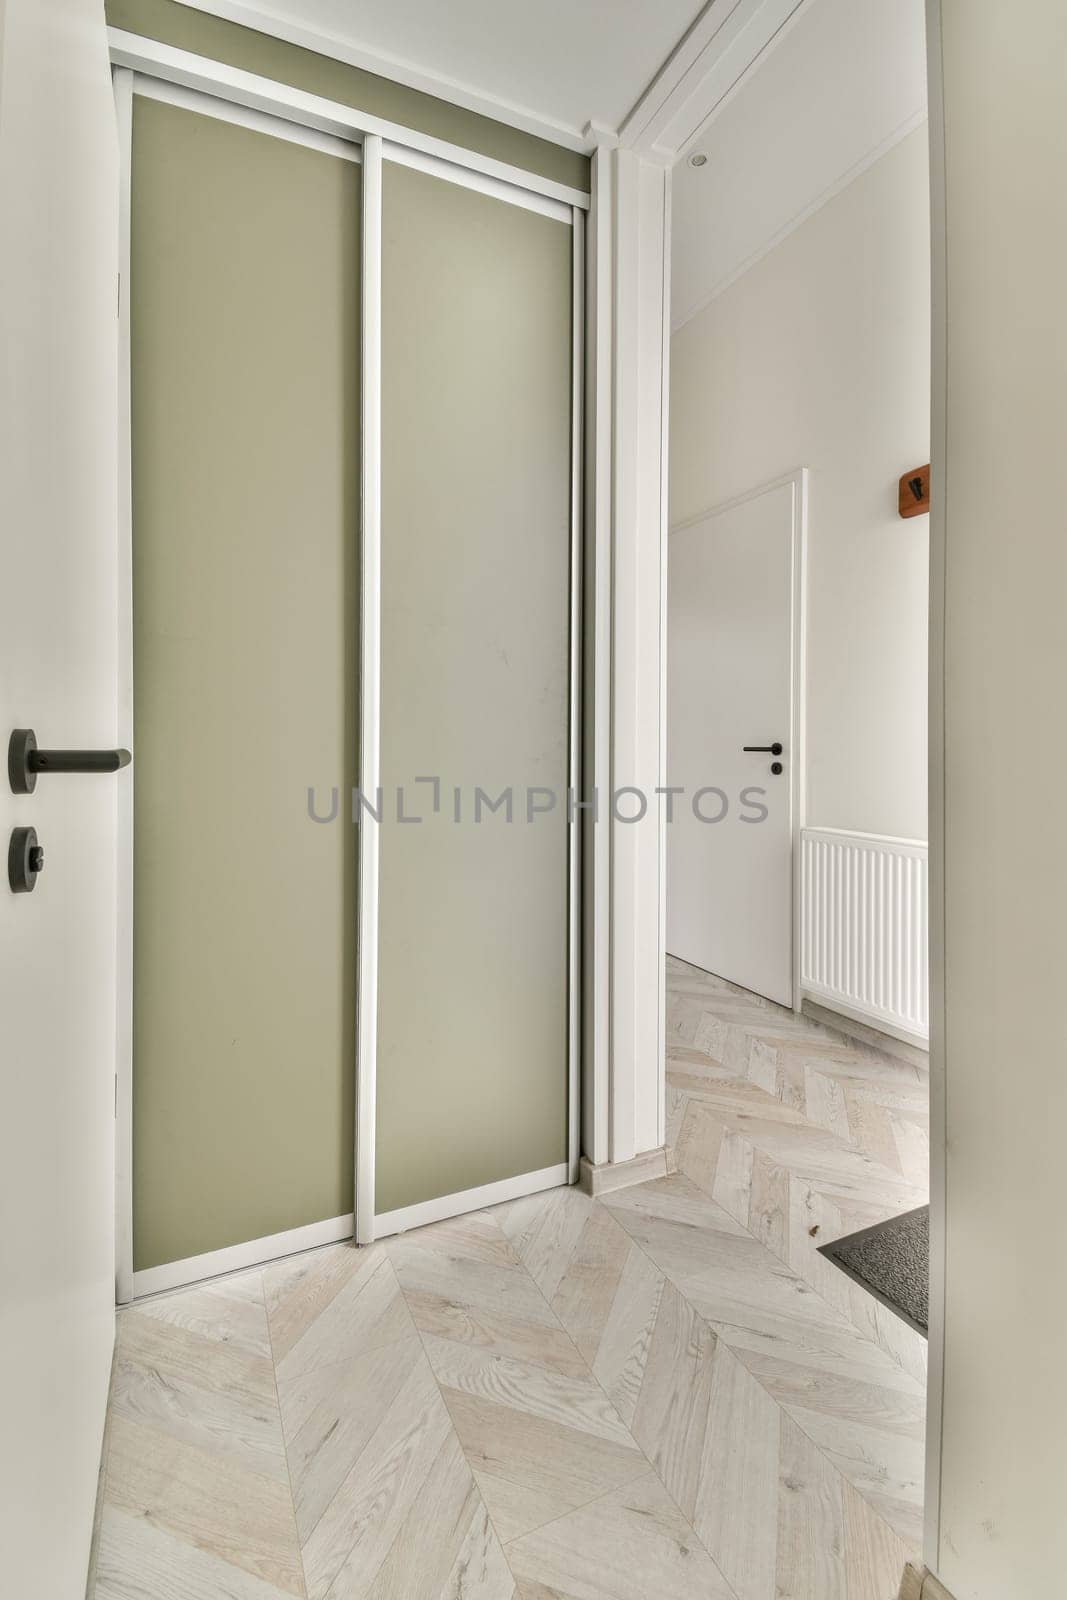 an empty room with two doors and one door open to the other room, which is very light green in color